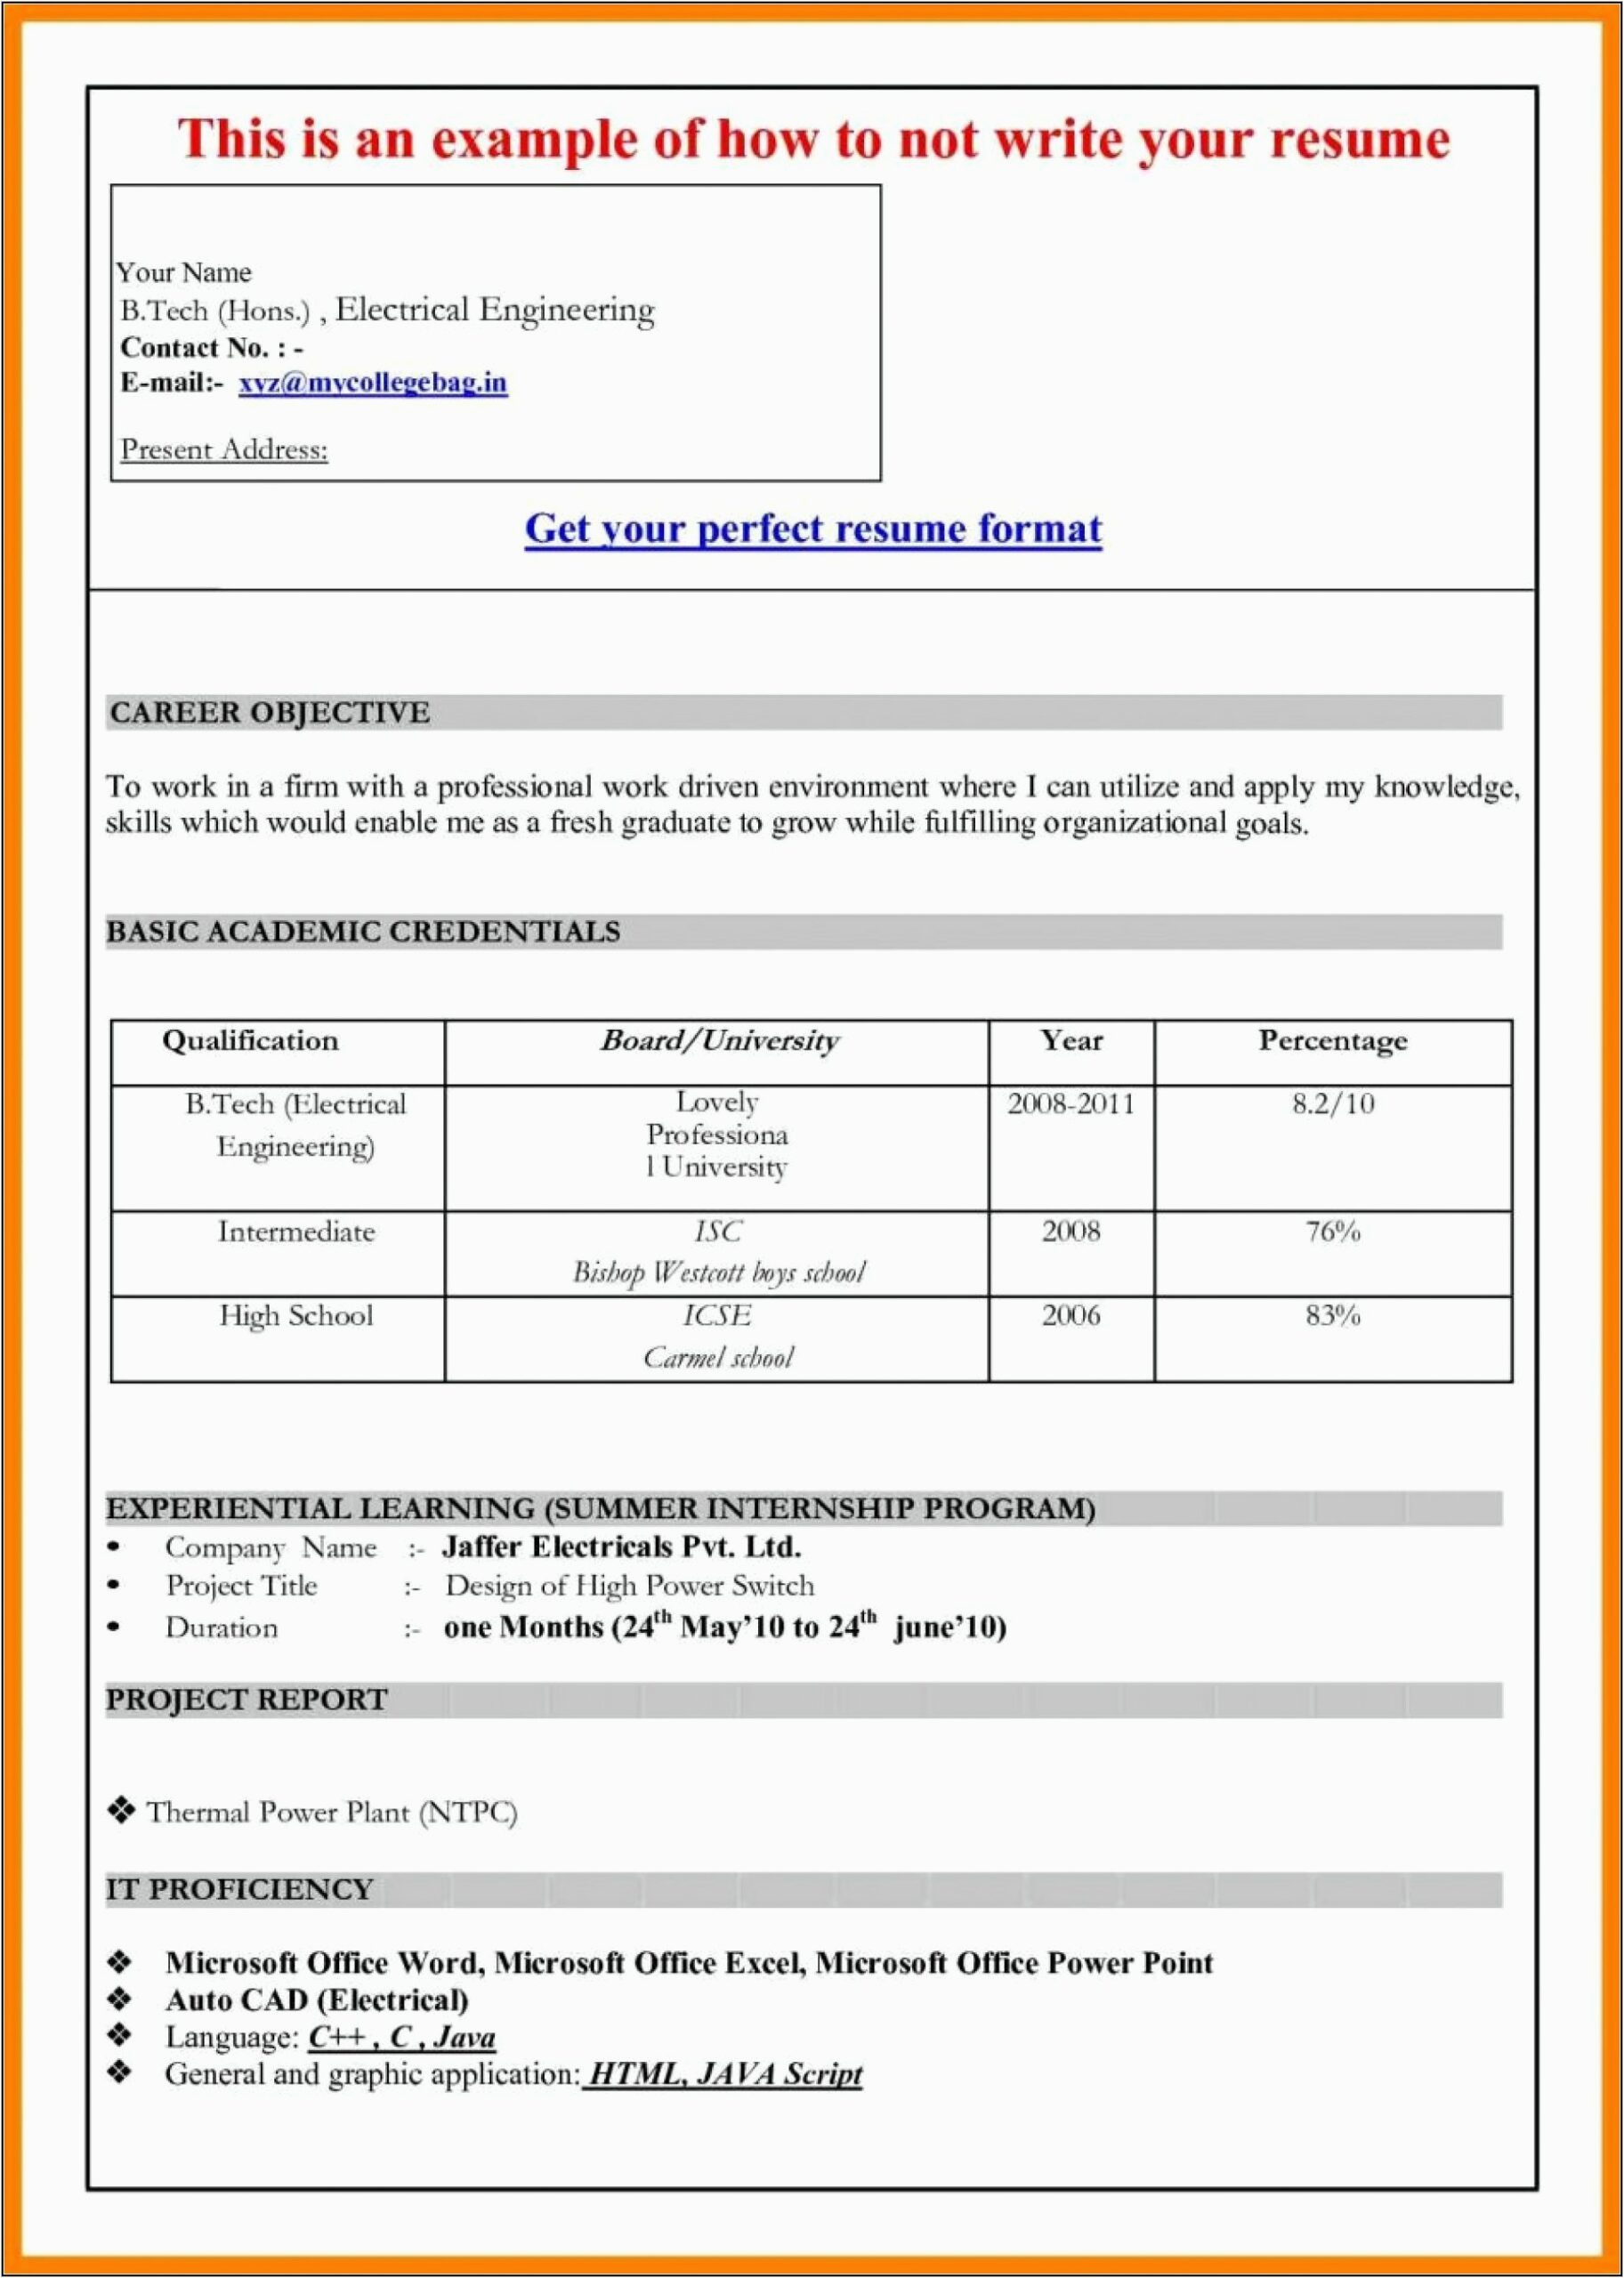 Resume Template for Teachers In India Indian Teacher Resume Templates Microsoft Word 2007